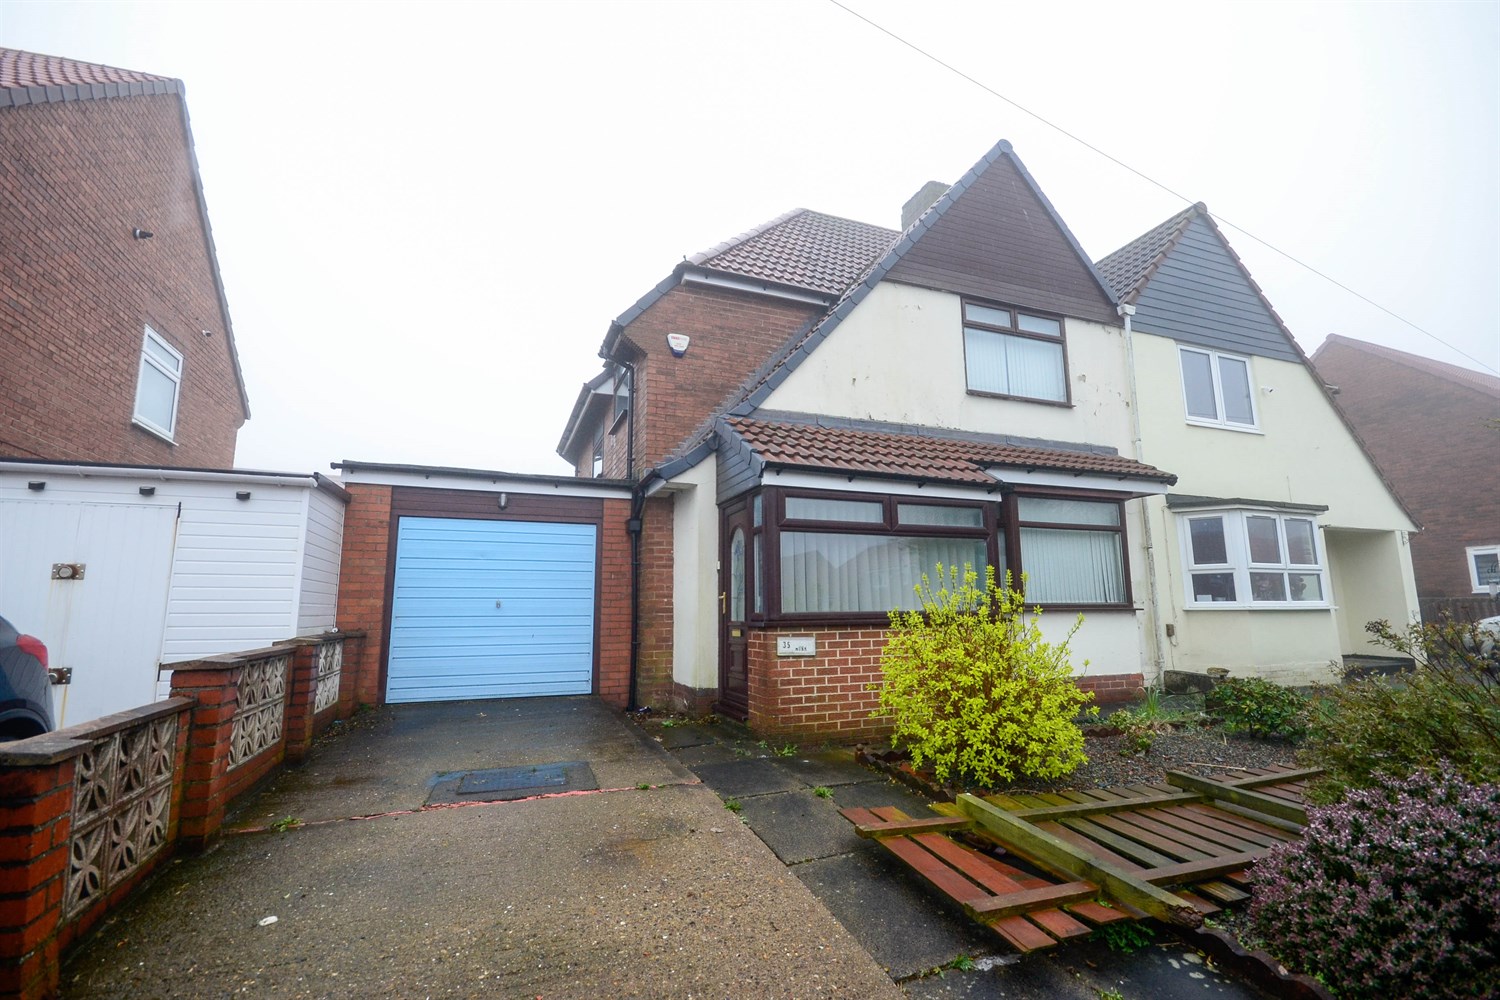 3 bed semi-detached house for sale in Aycliffe Avenue, Wrekenton - Property Image 1